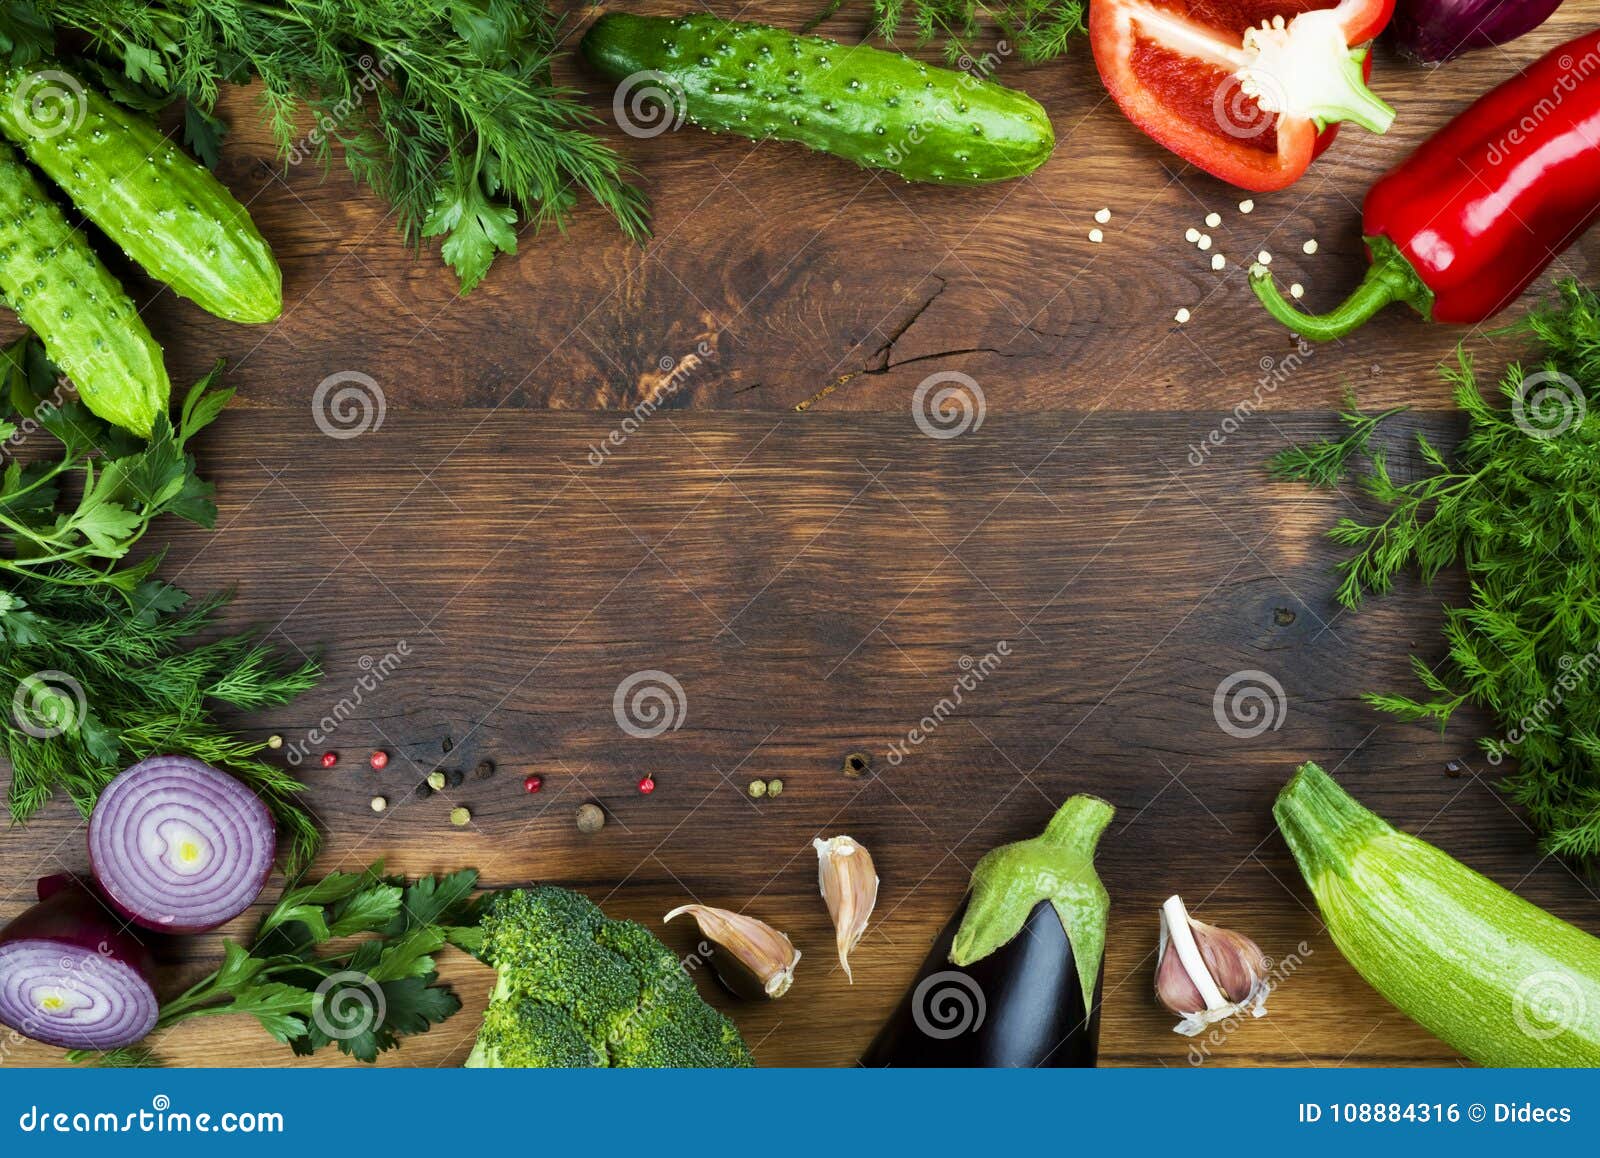 Raw Vegetables on Wooden Texture Background with Copyspace in Center ...